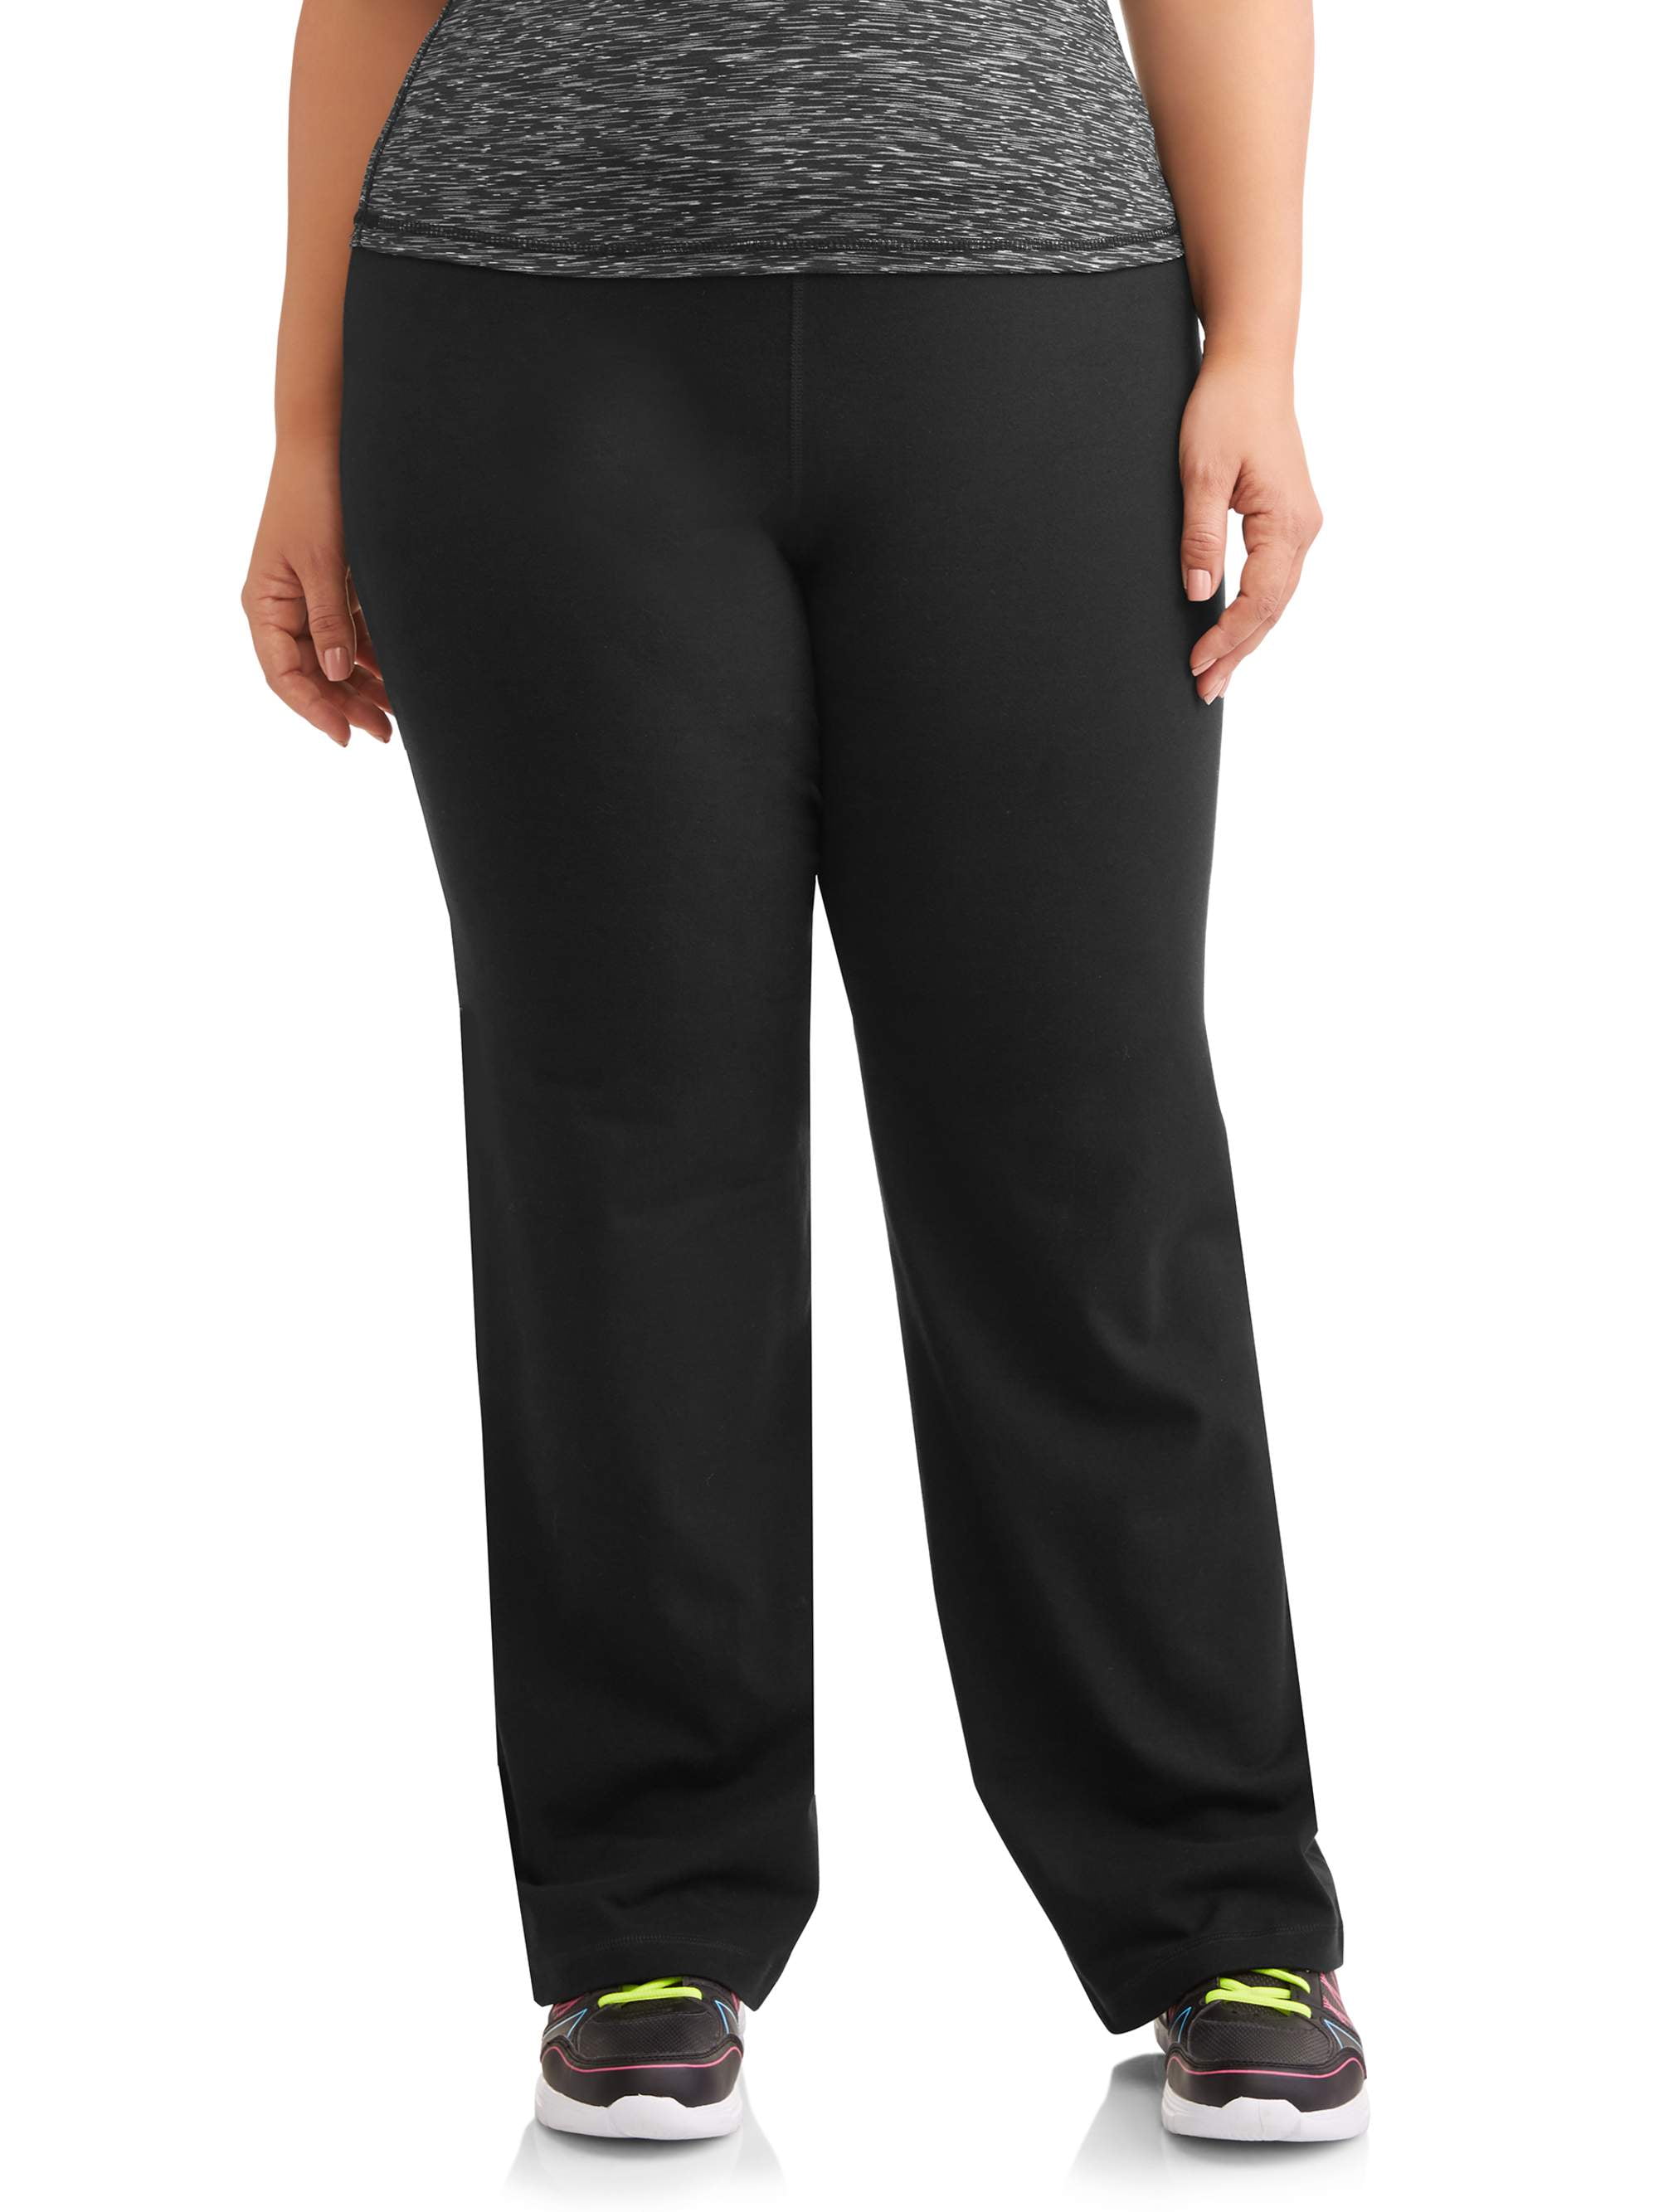 Athletic Works Womens Athleisure Soft Jogger Pants  Walmartcom   Athleisure women Soft joggers Jogger pants